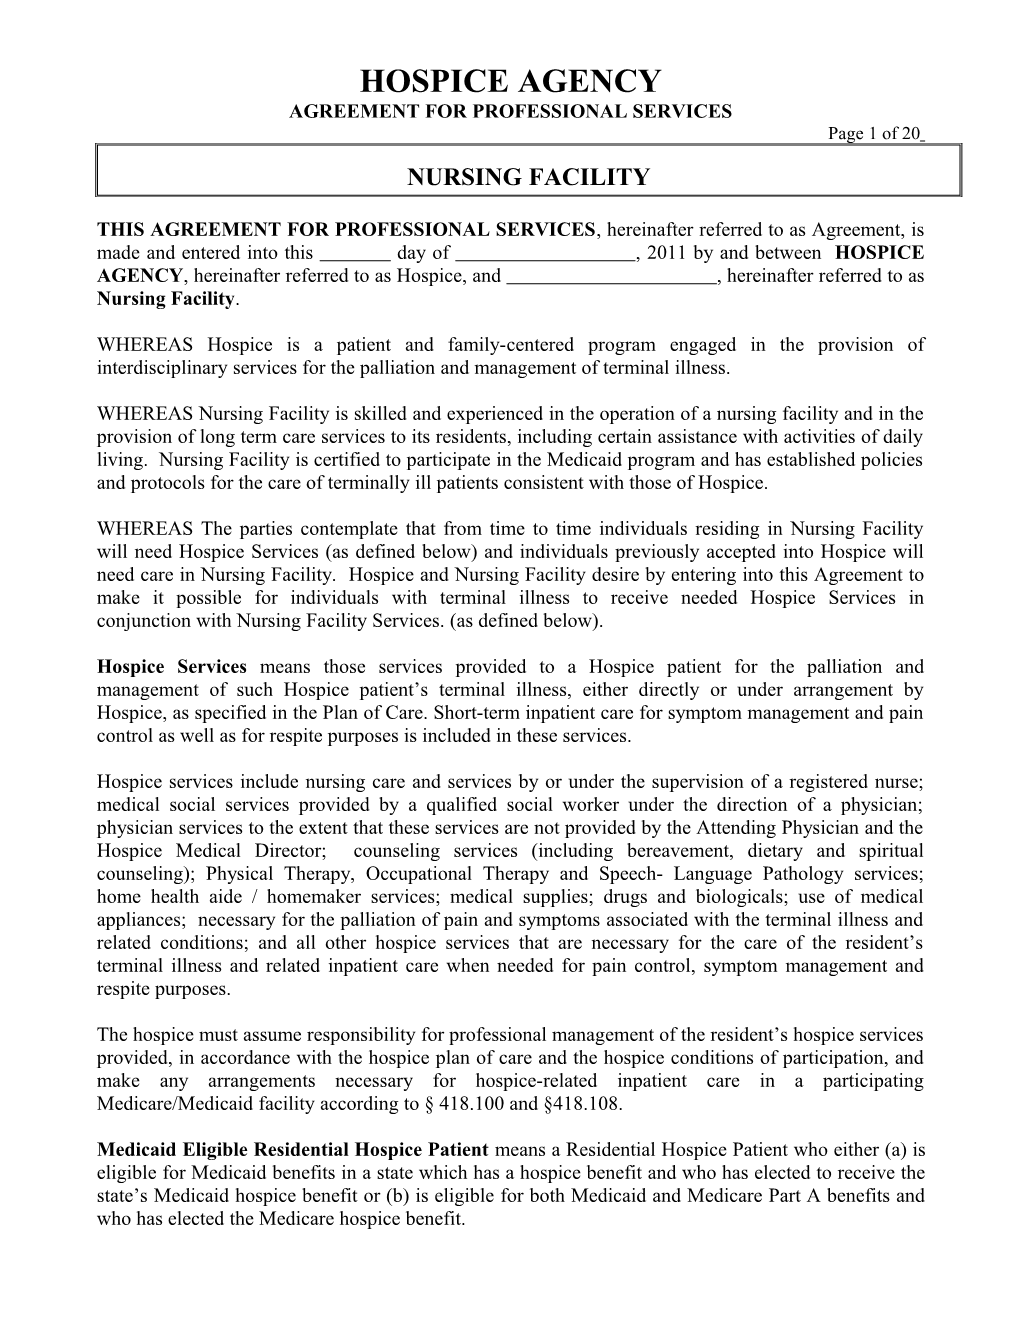 Agreement for Professional Services s1